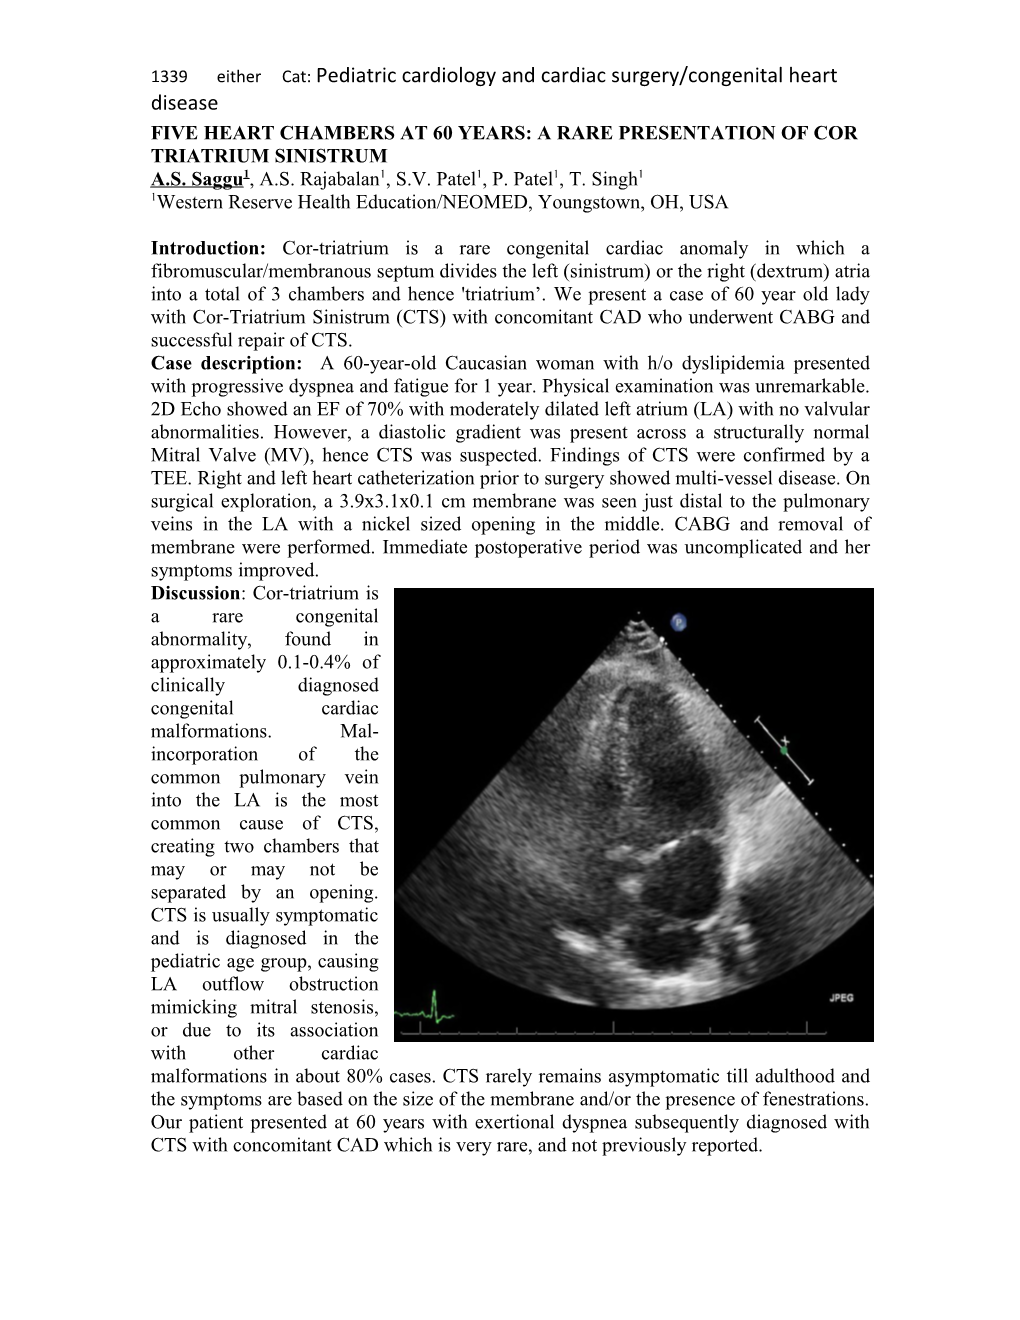 Five Heart Chambers at 60 Years: a Rare Presentation of Cor Triatrium Sinistrum